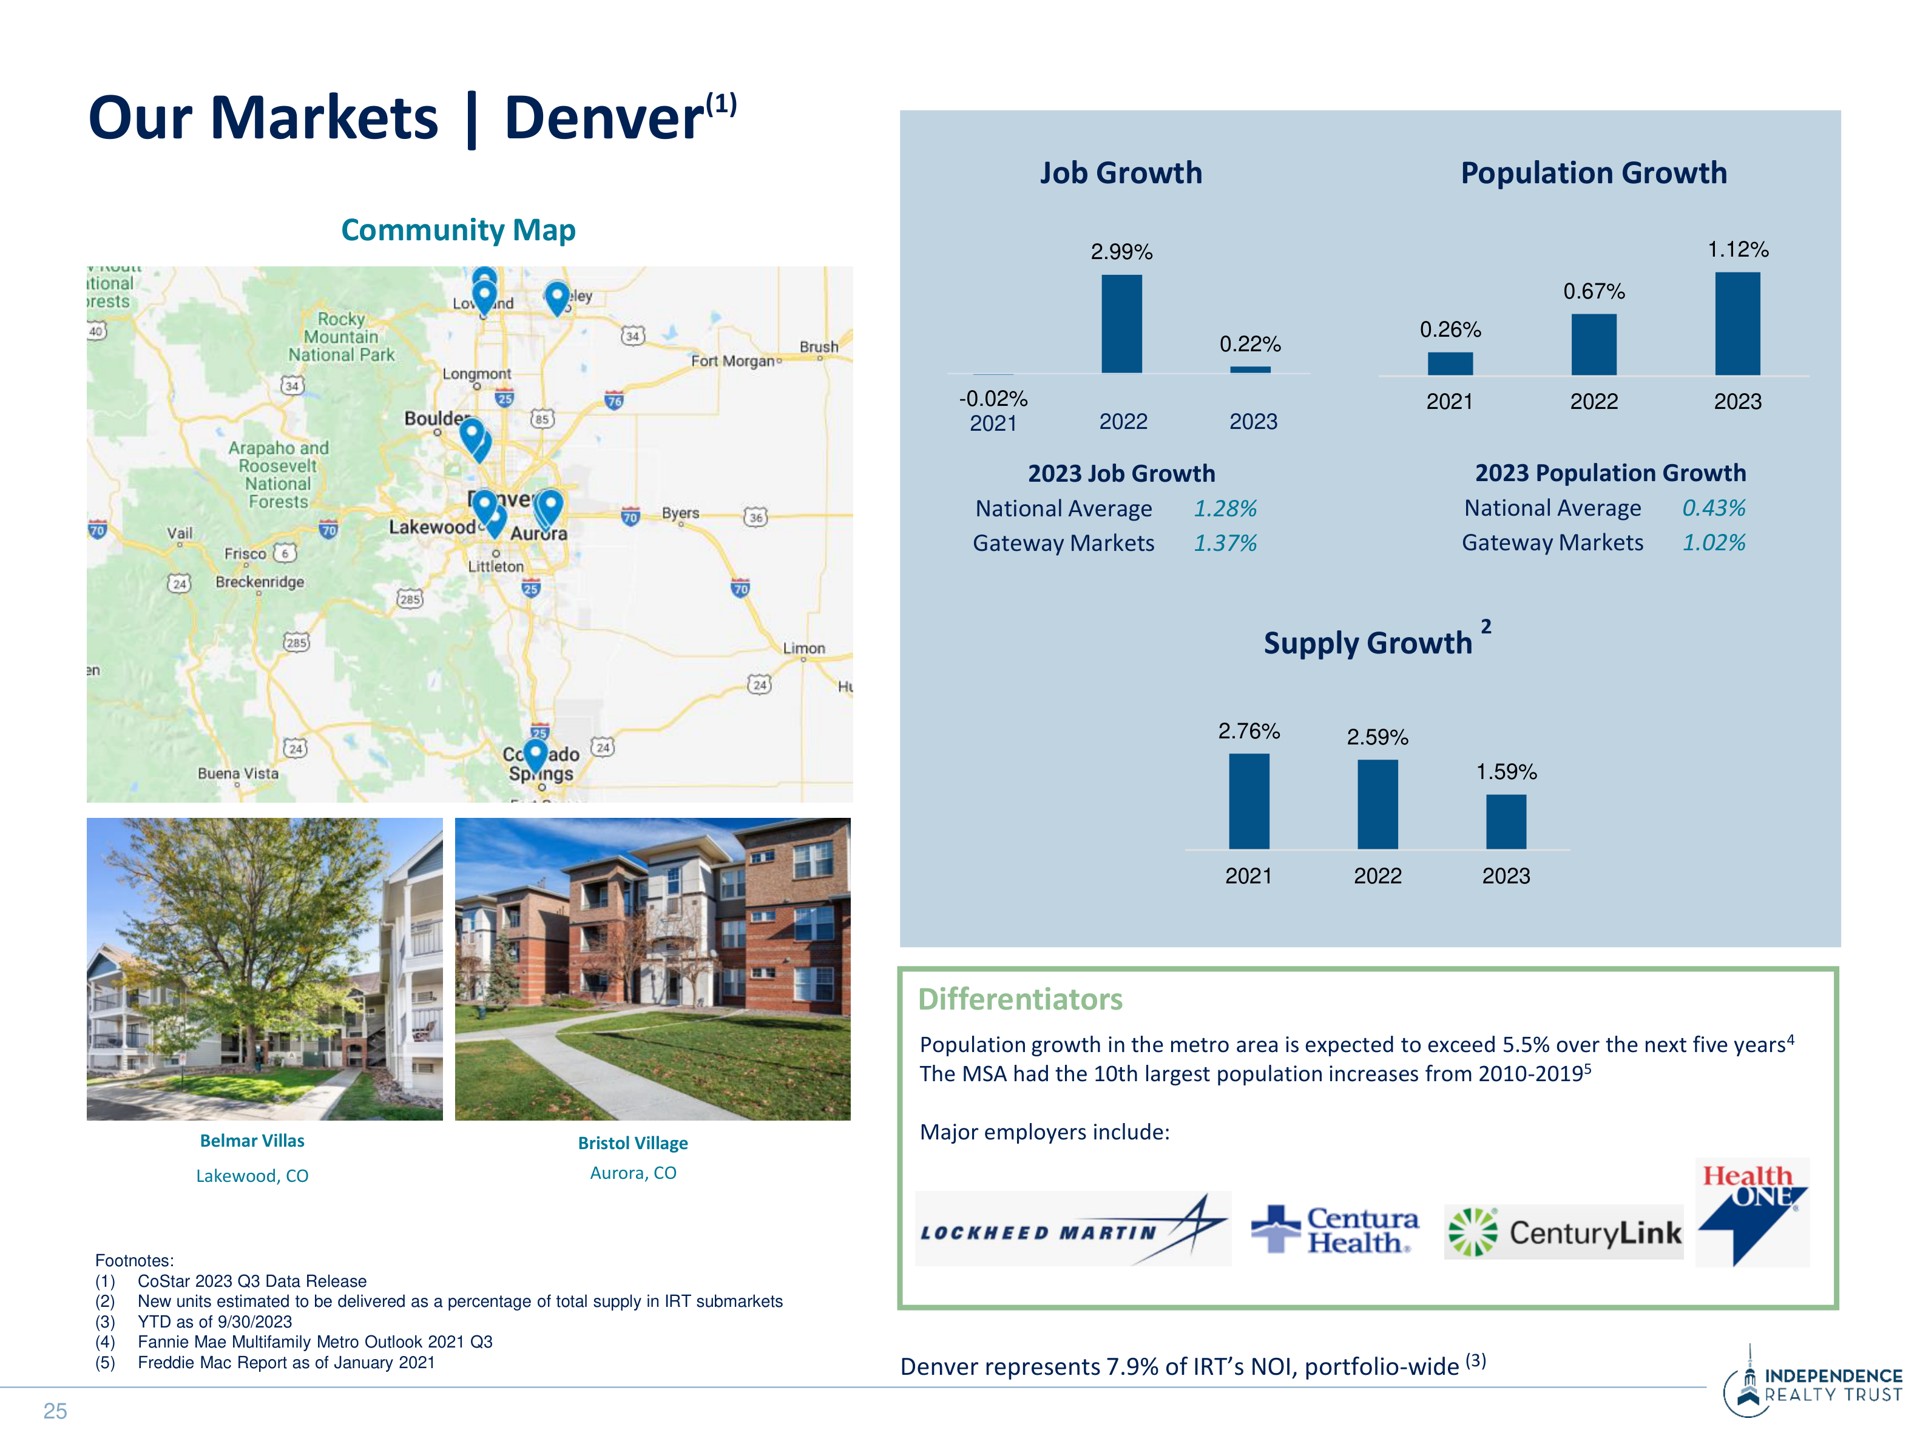 our markets | Independence Realty Trust